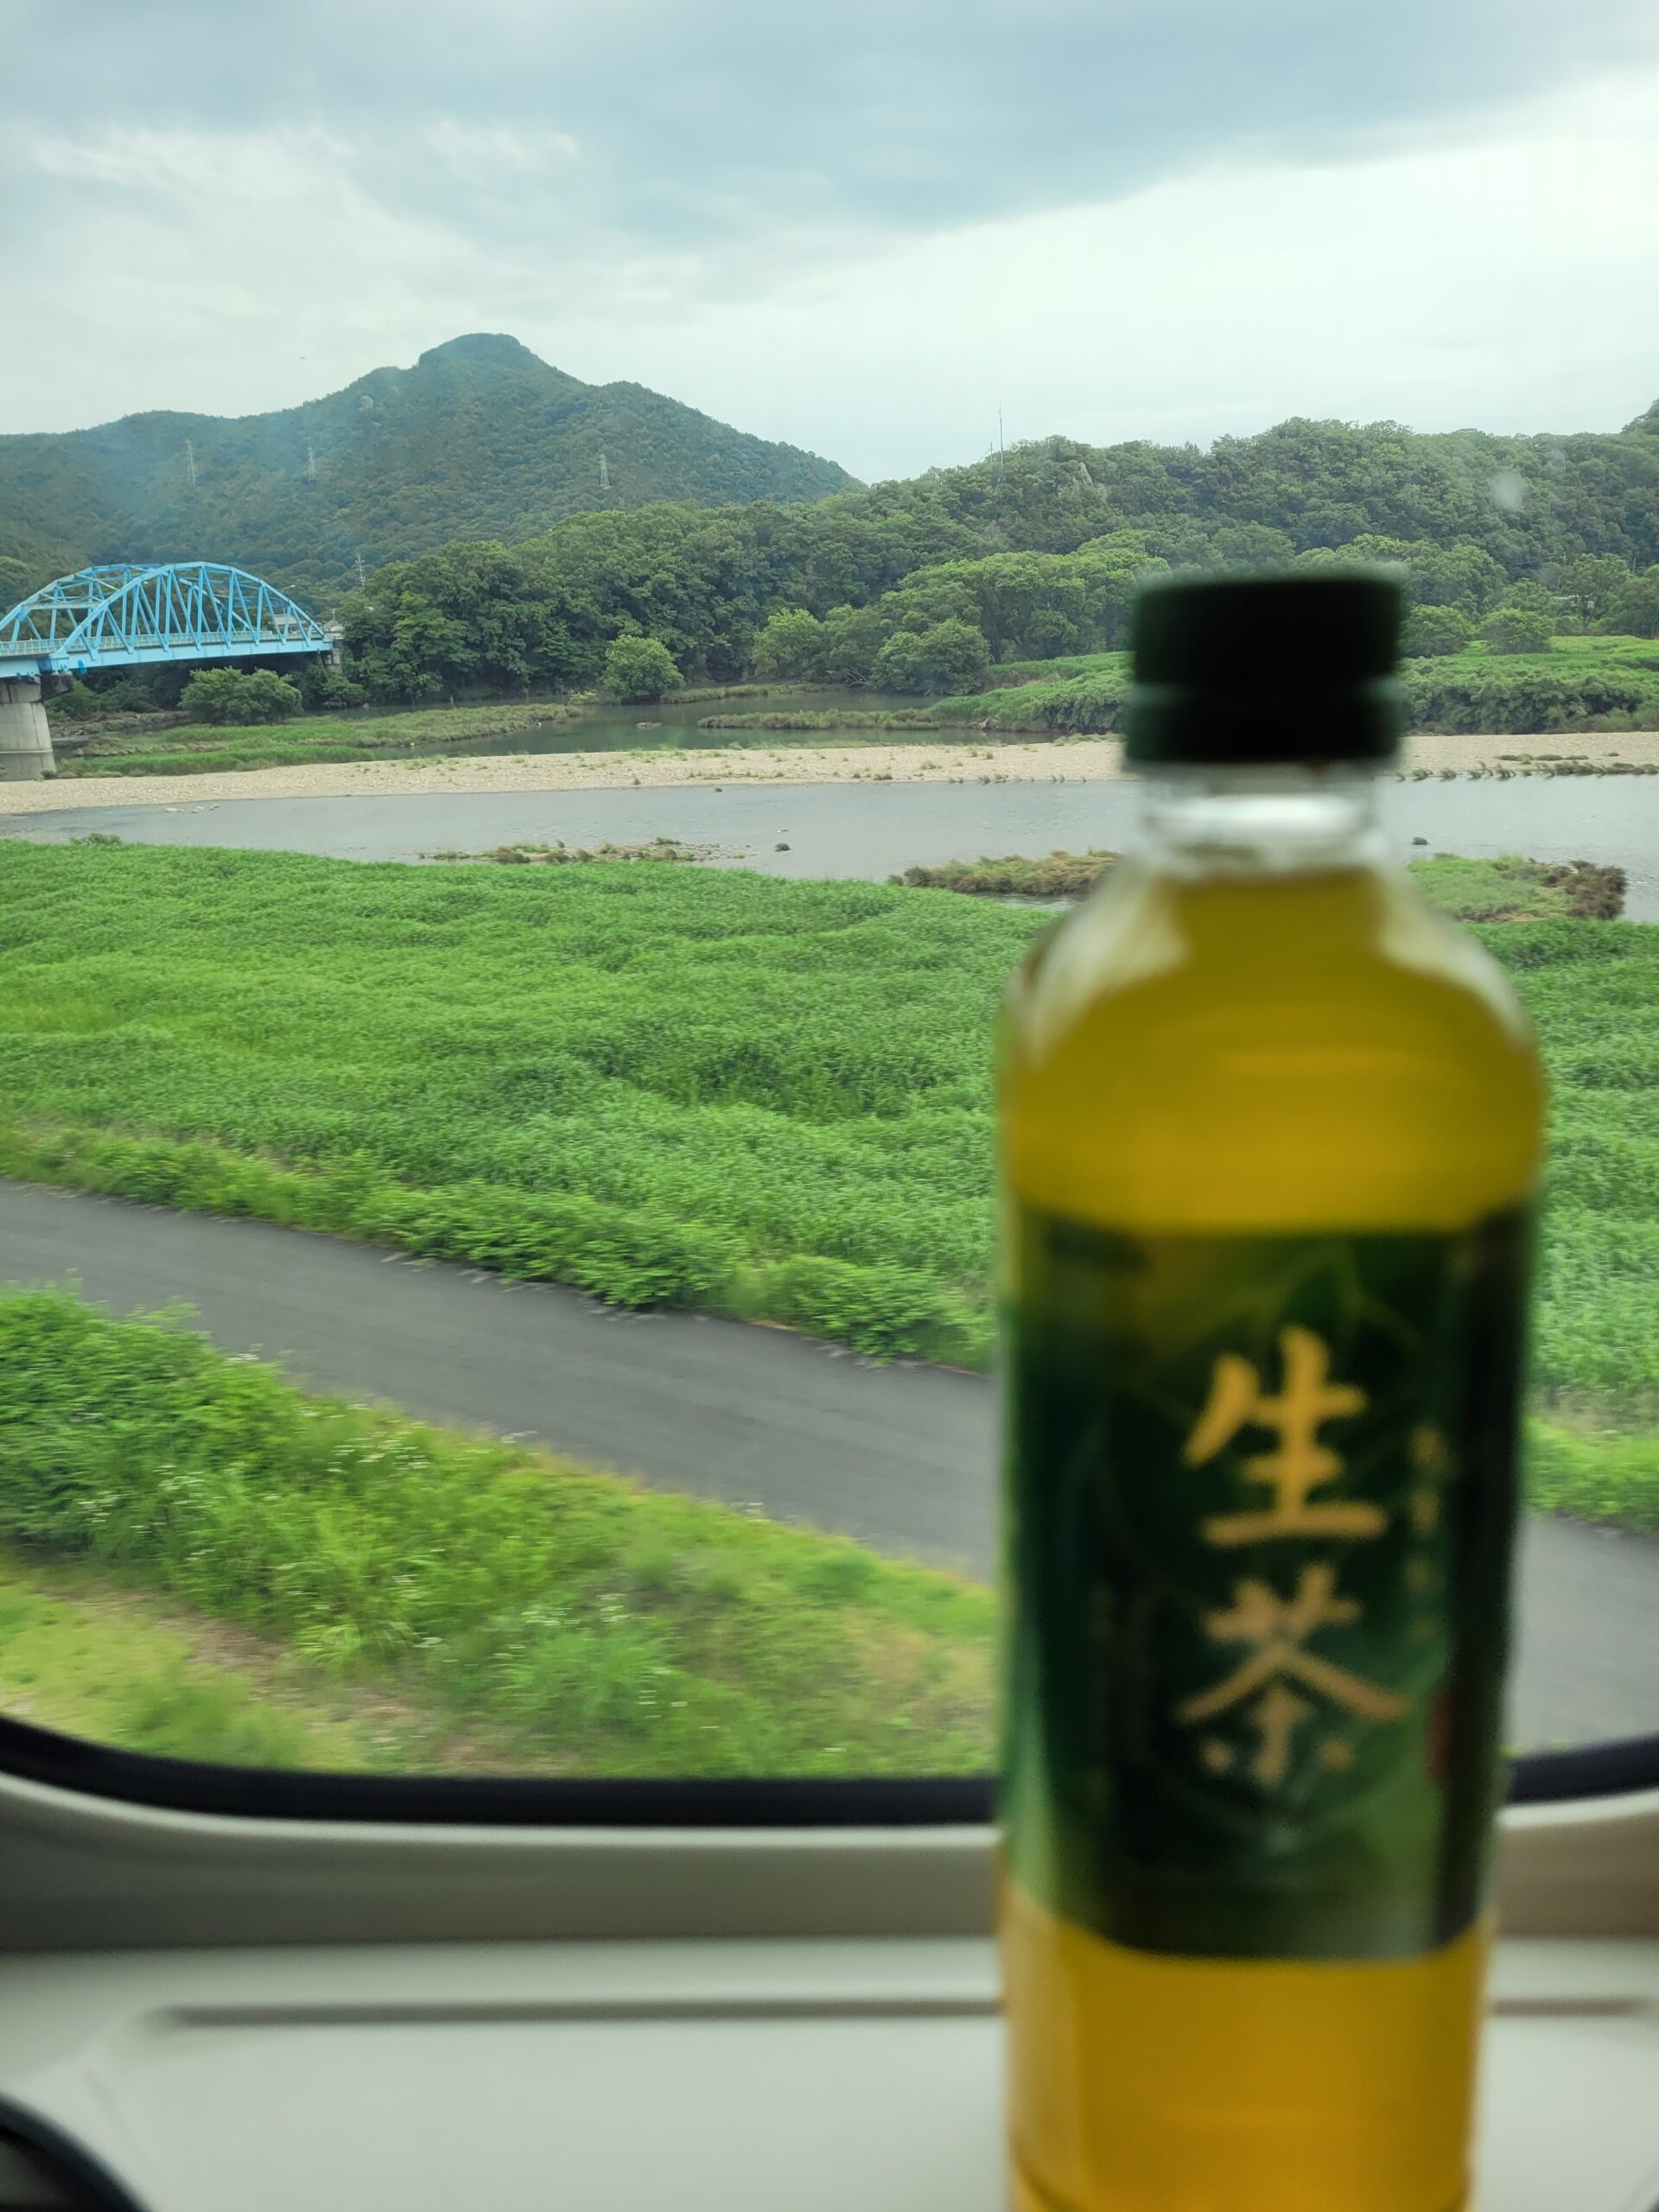 5 activities to pass the time on long bullet train rides in Japan